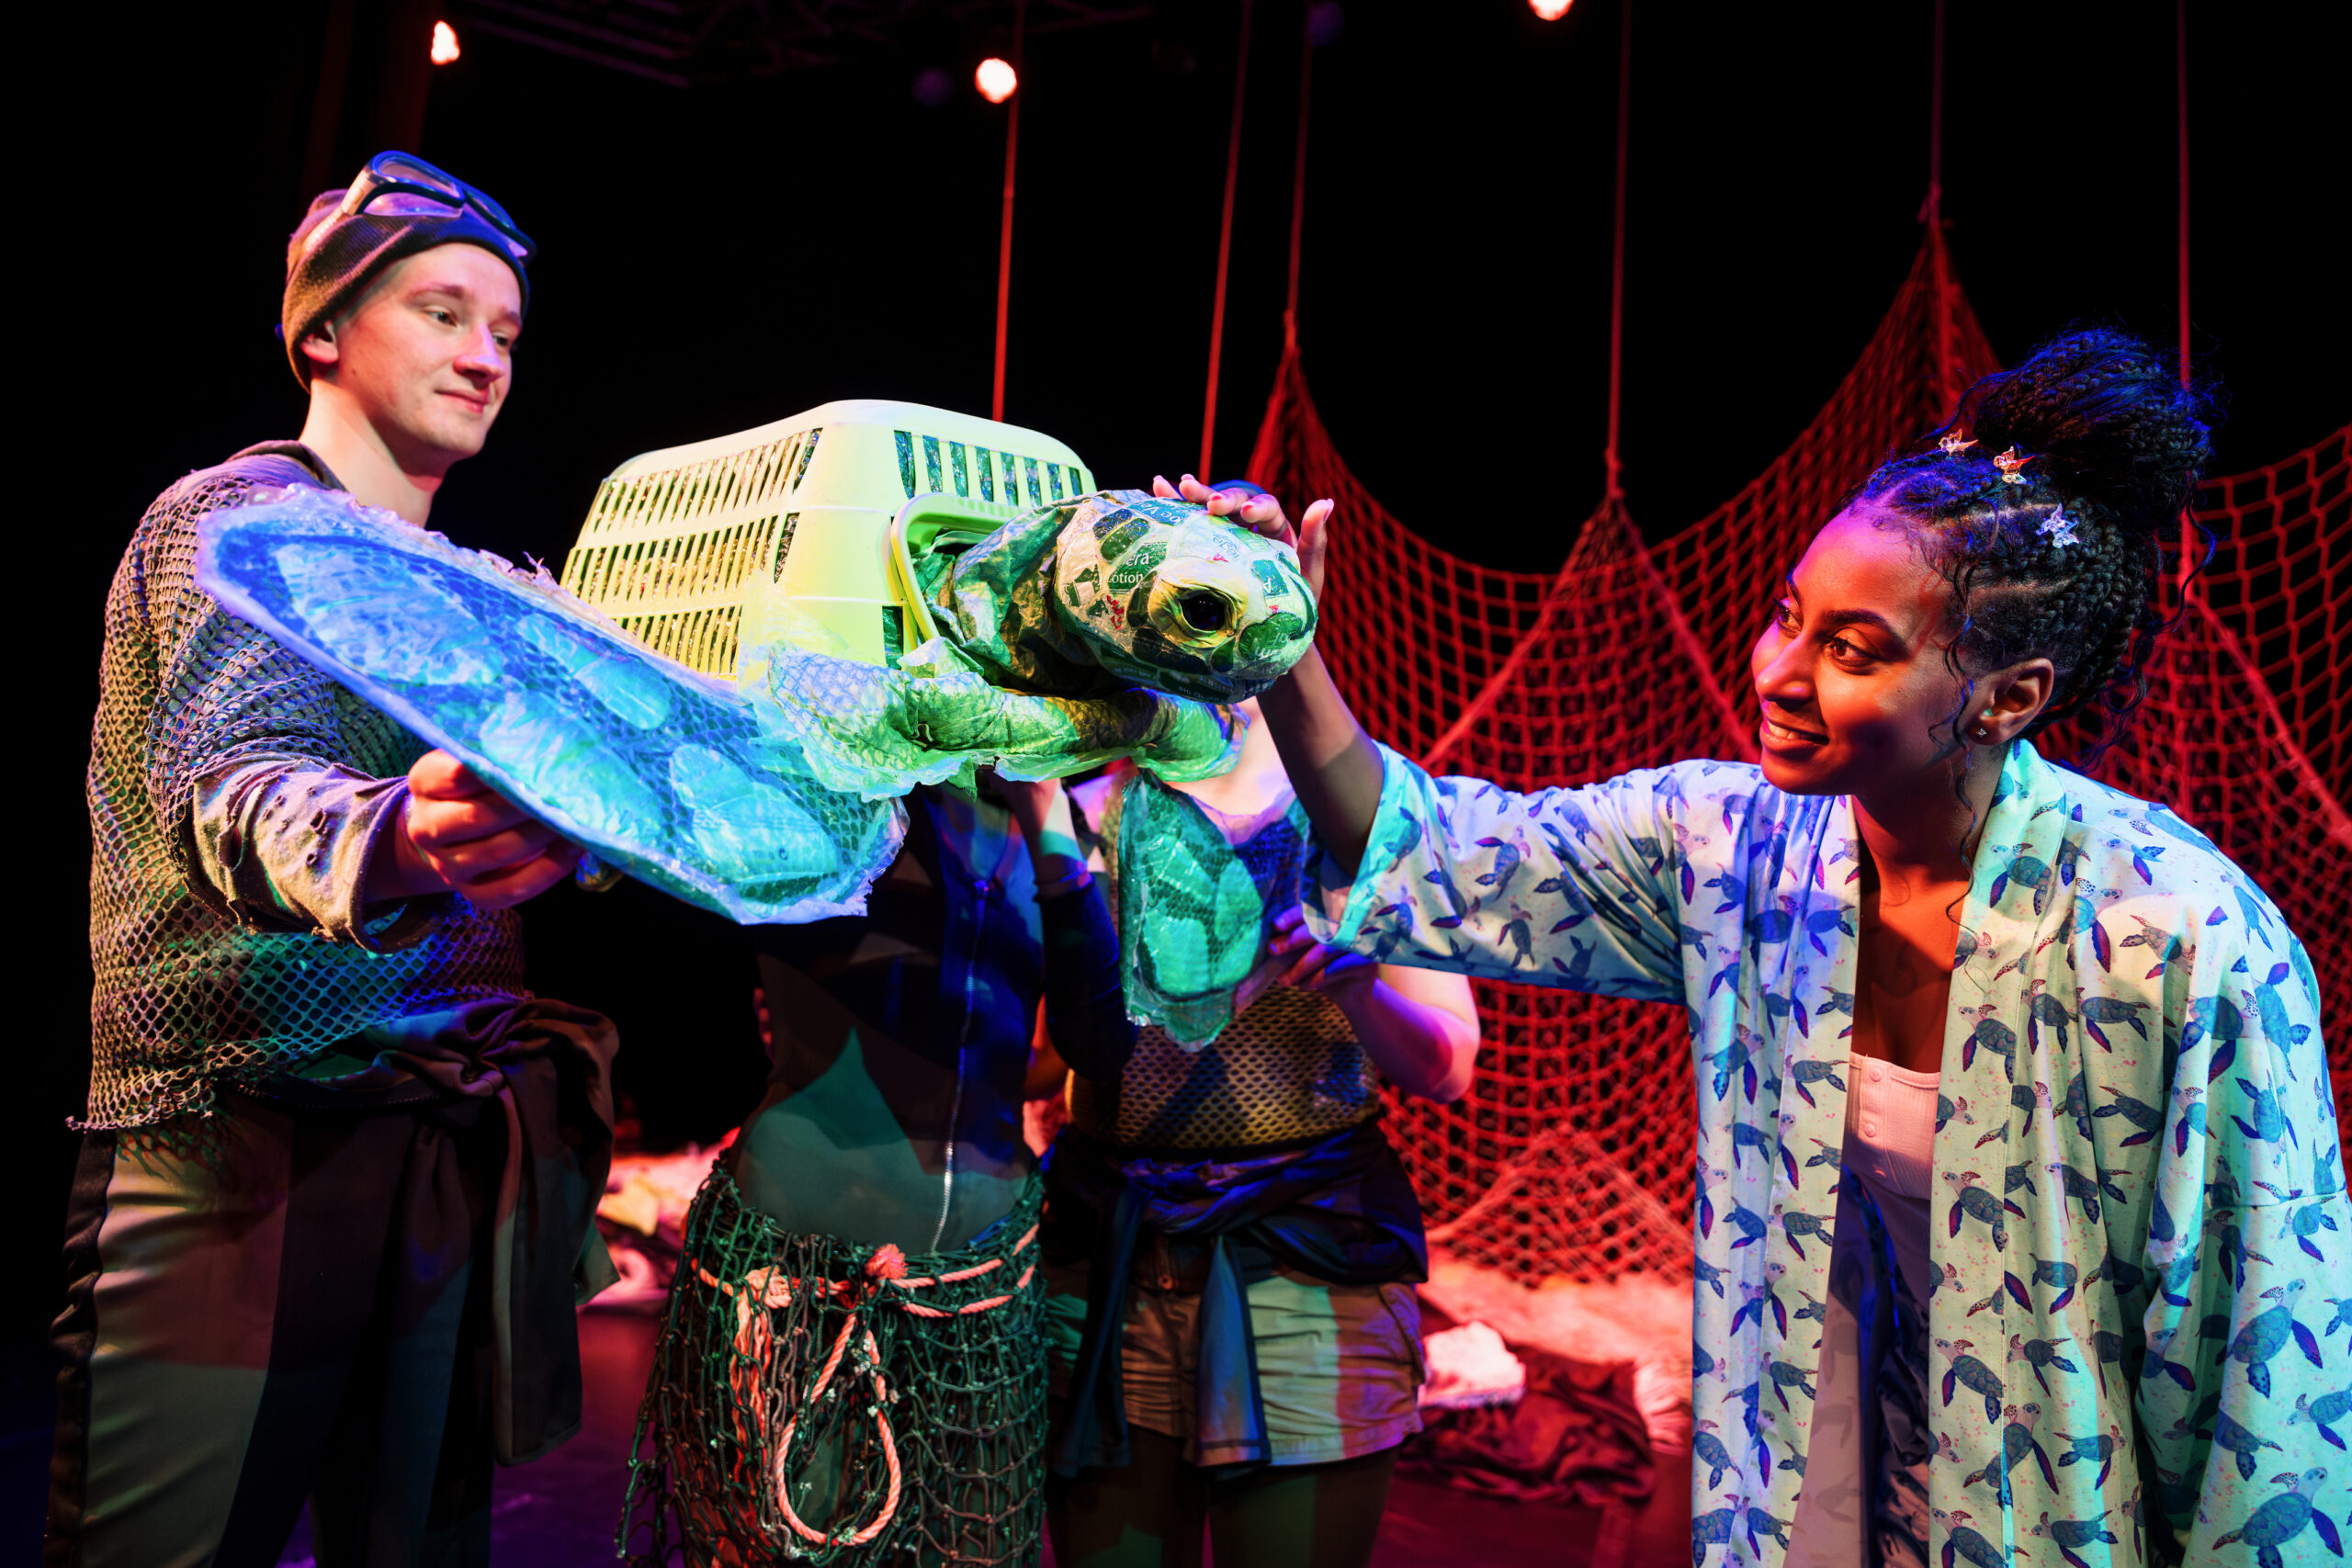 two puppeteers hold a puppet turtle made out of a green plastic washing basket wtih plastic head and fins. An actress in a dressing gown is stroking the turtles head and looking lovingly at it.